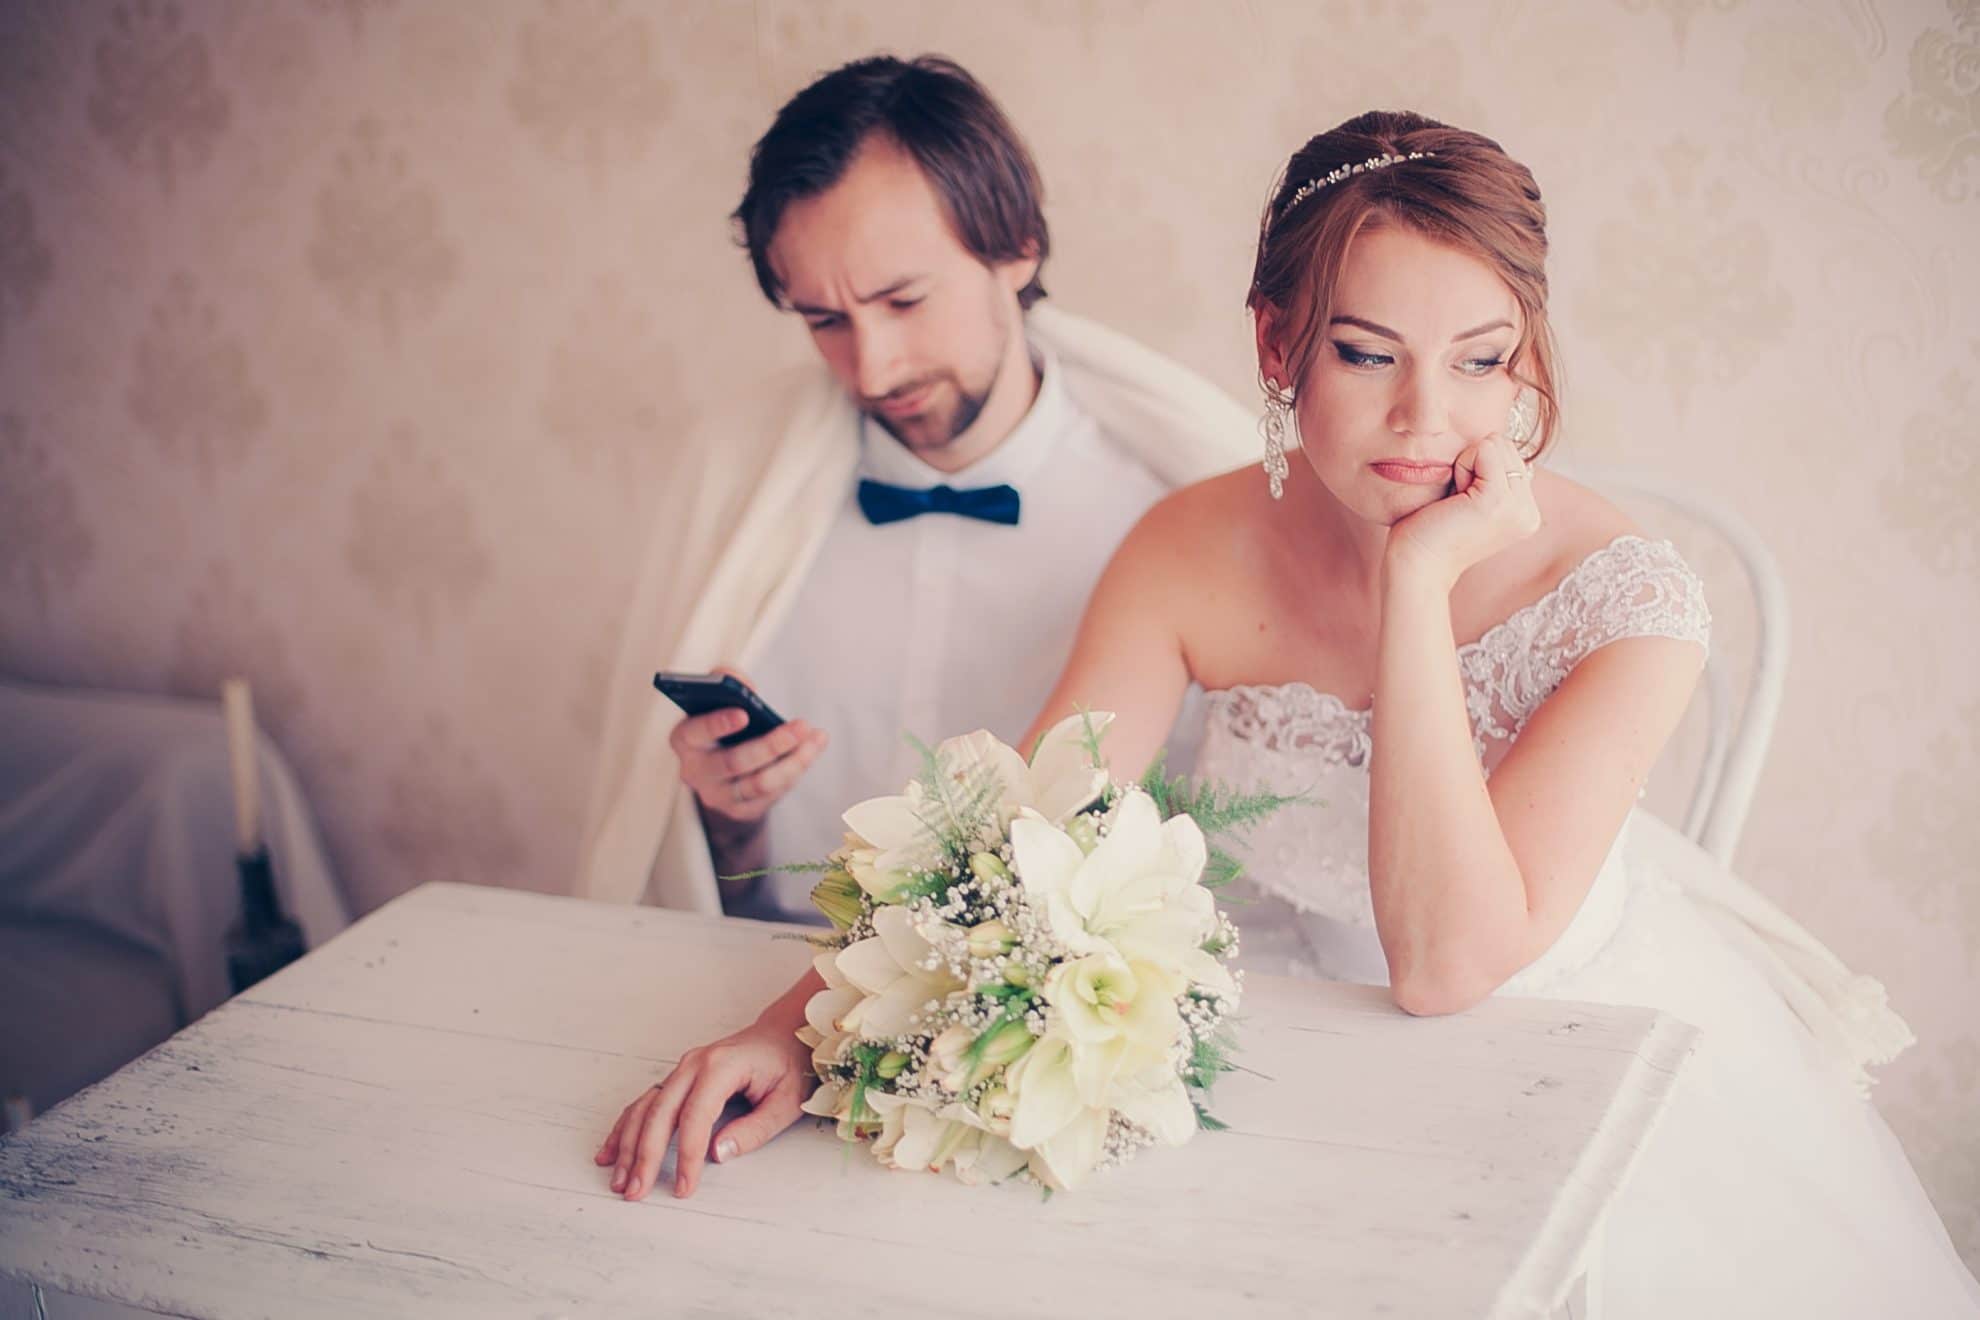 mistakes couples make when wedding planning